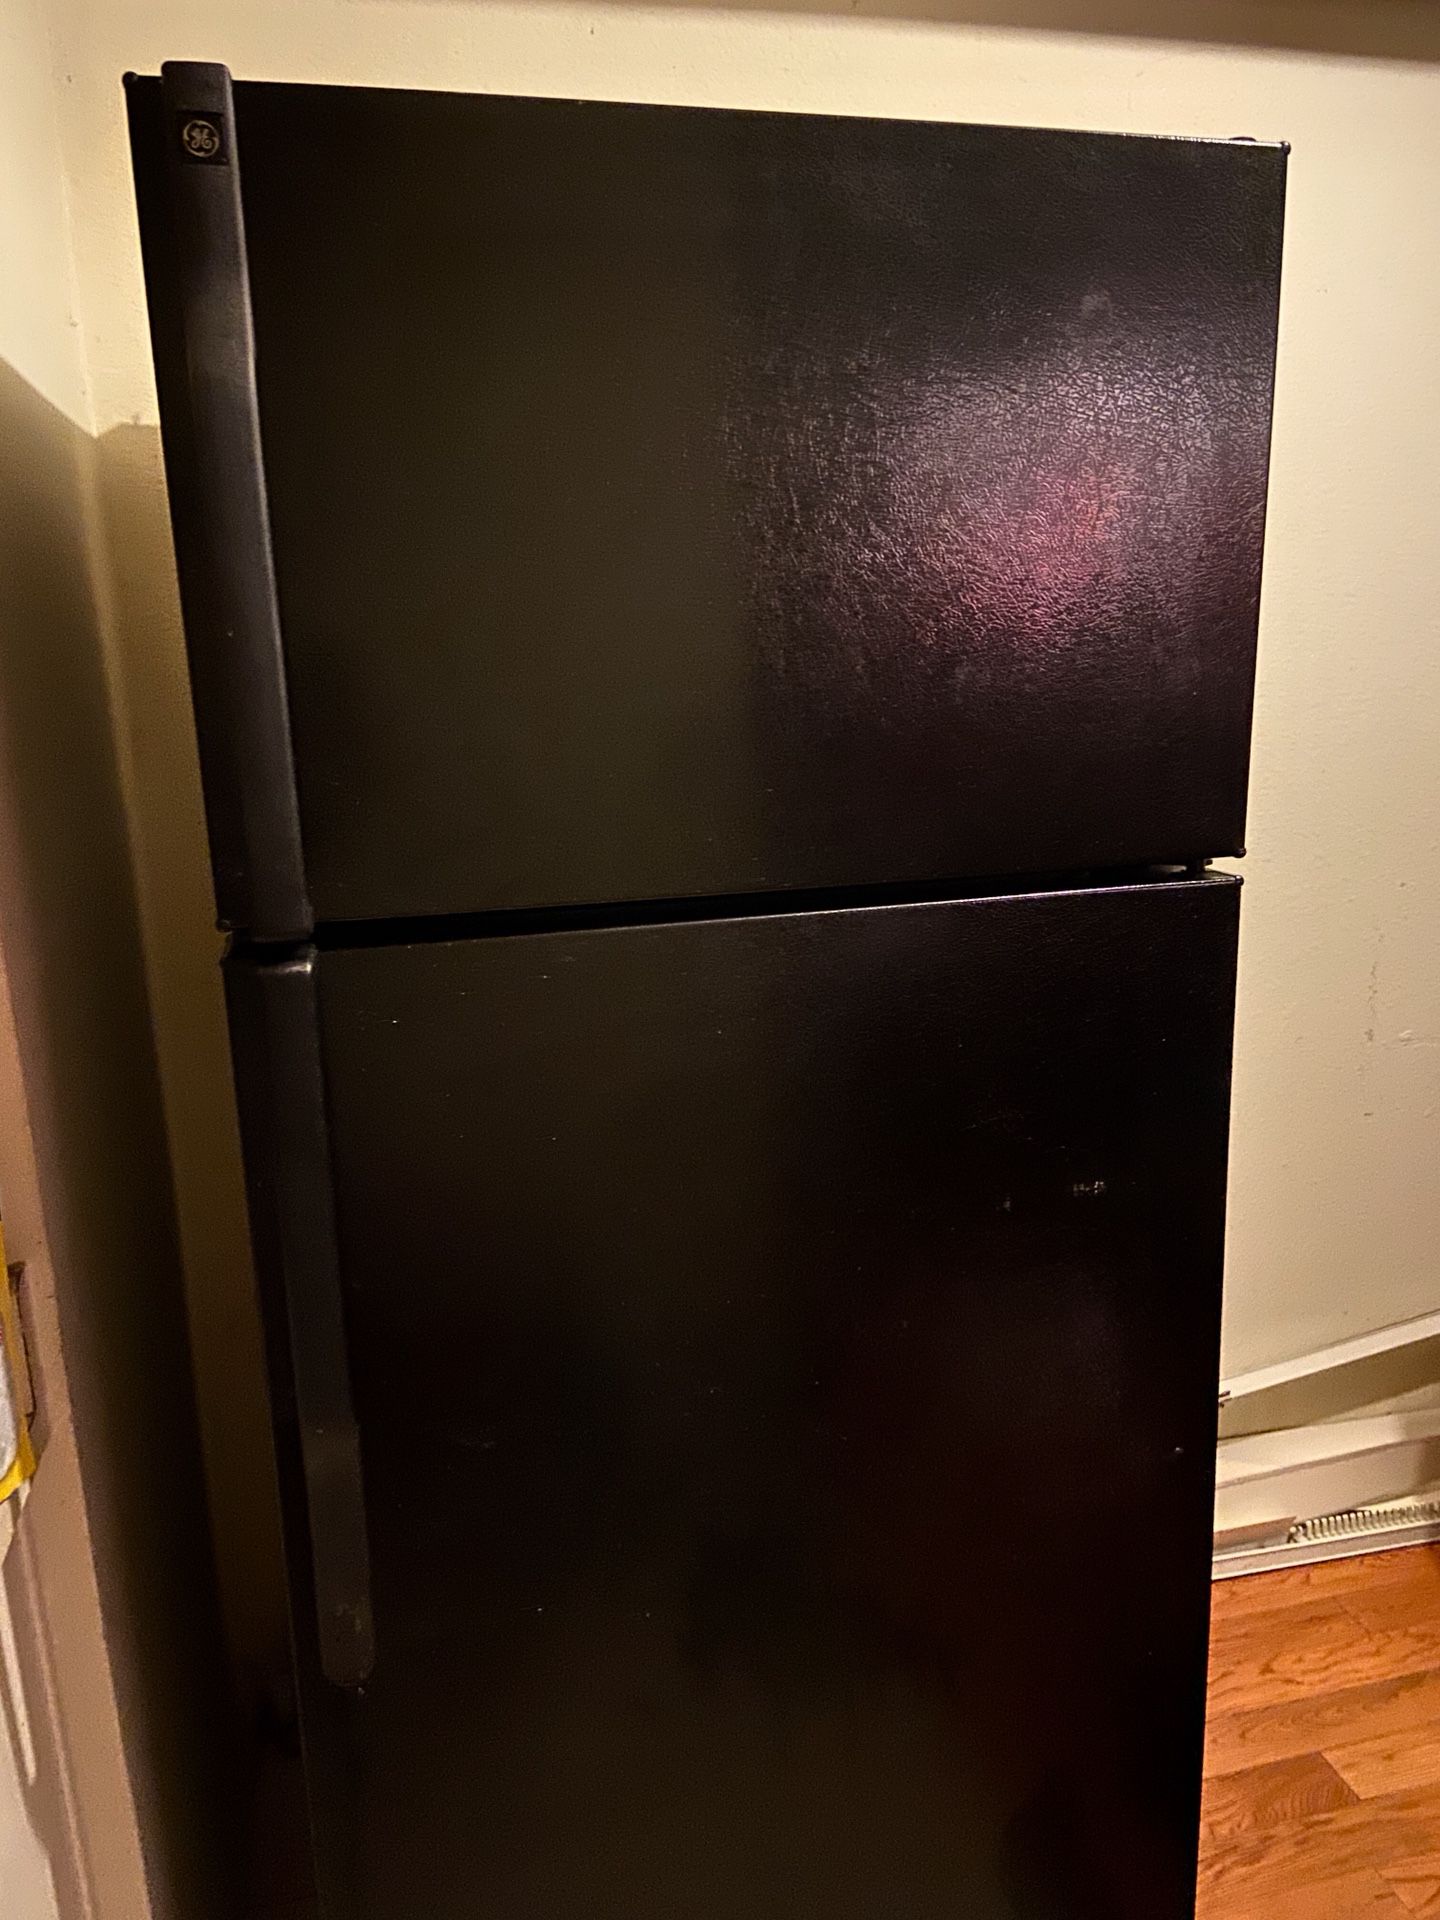 GE Energy Star 18 cu. inch Refrigerator(pick up only thanks)